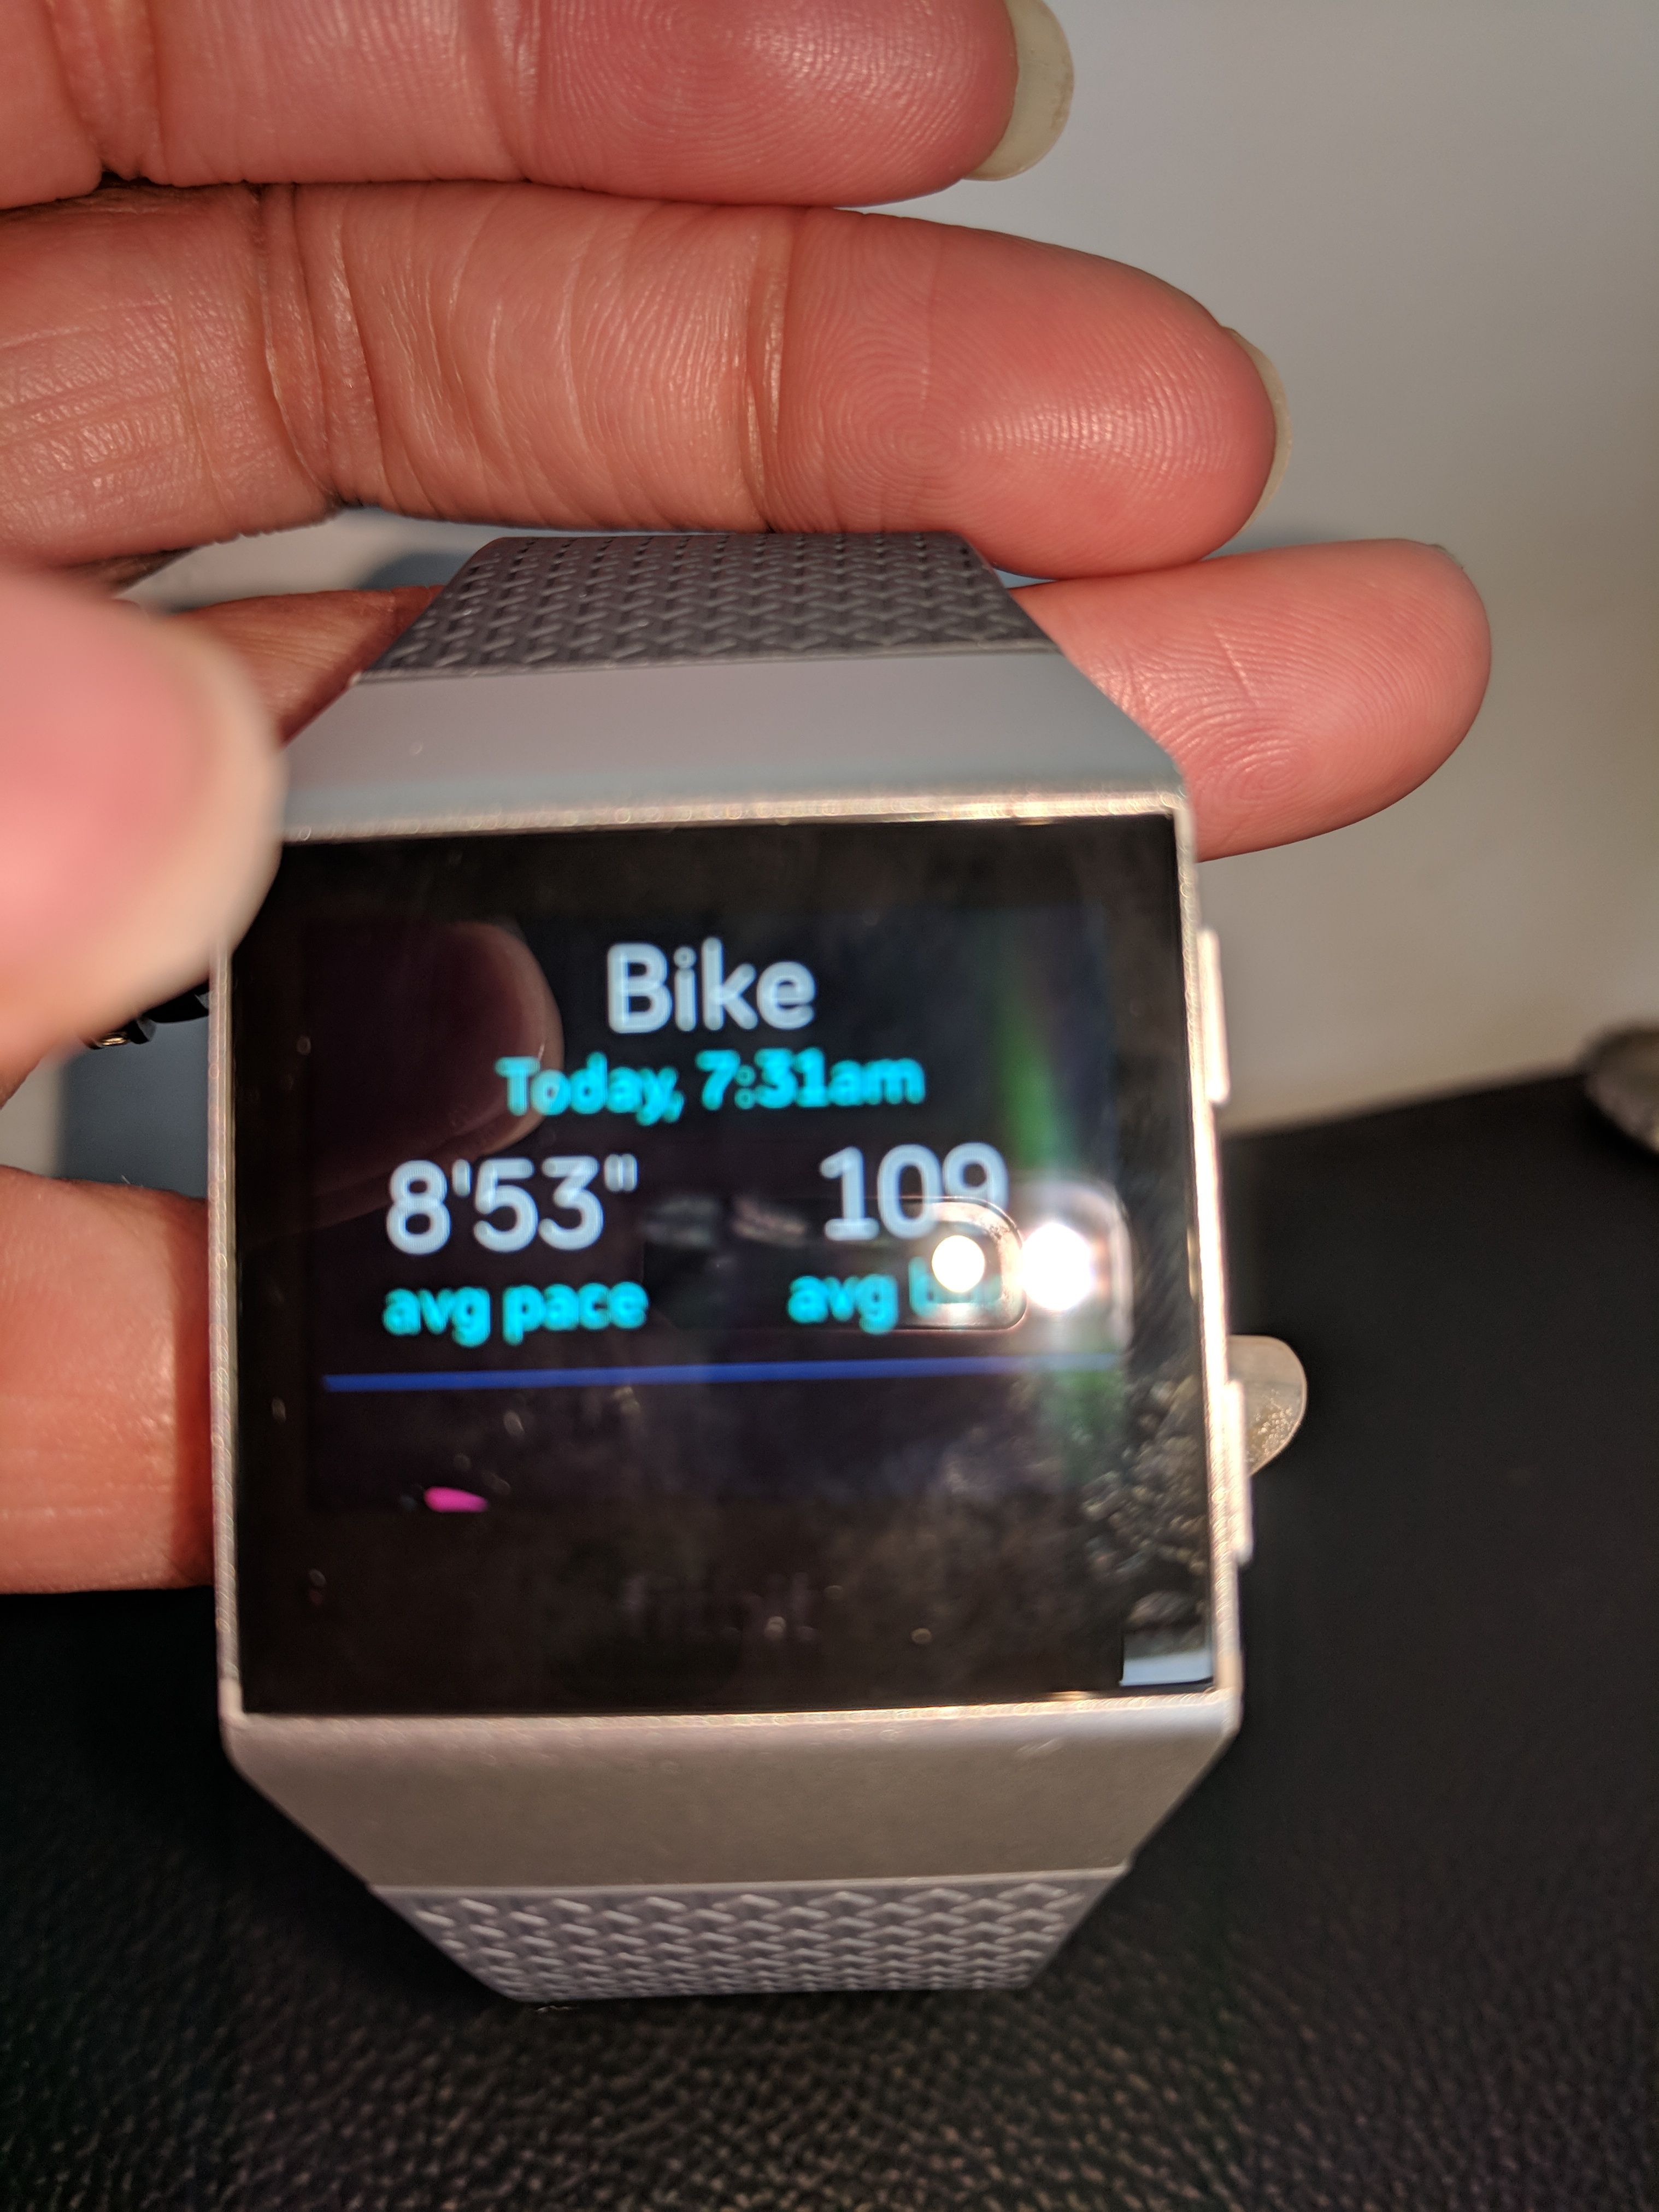 fitbit ionic screen blank how to reset